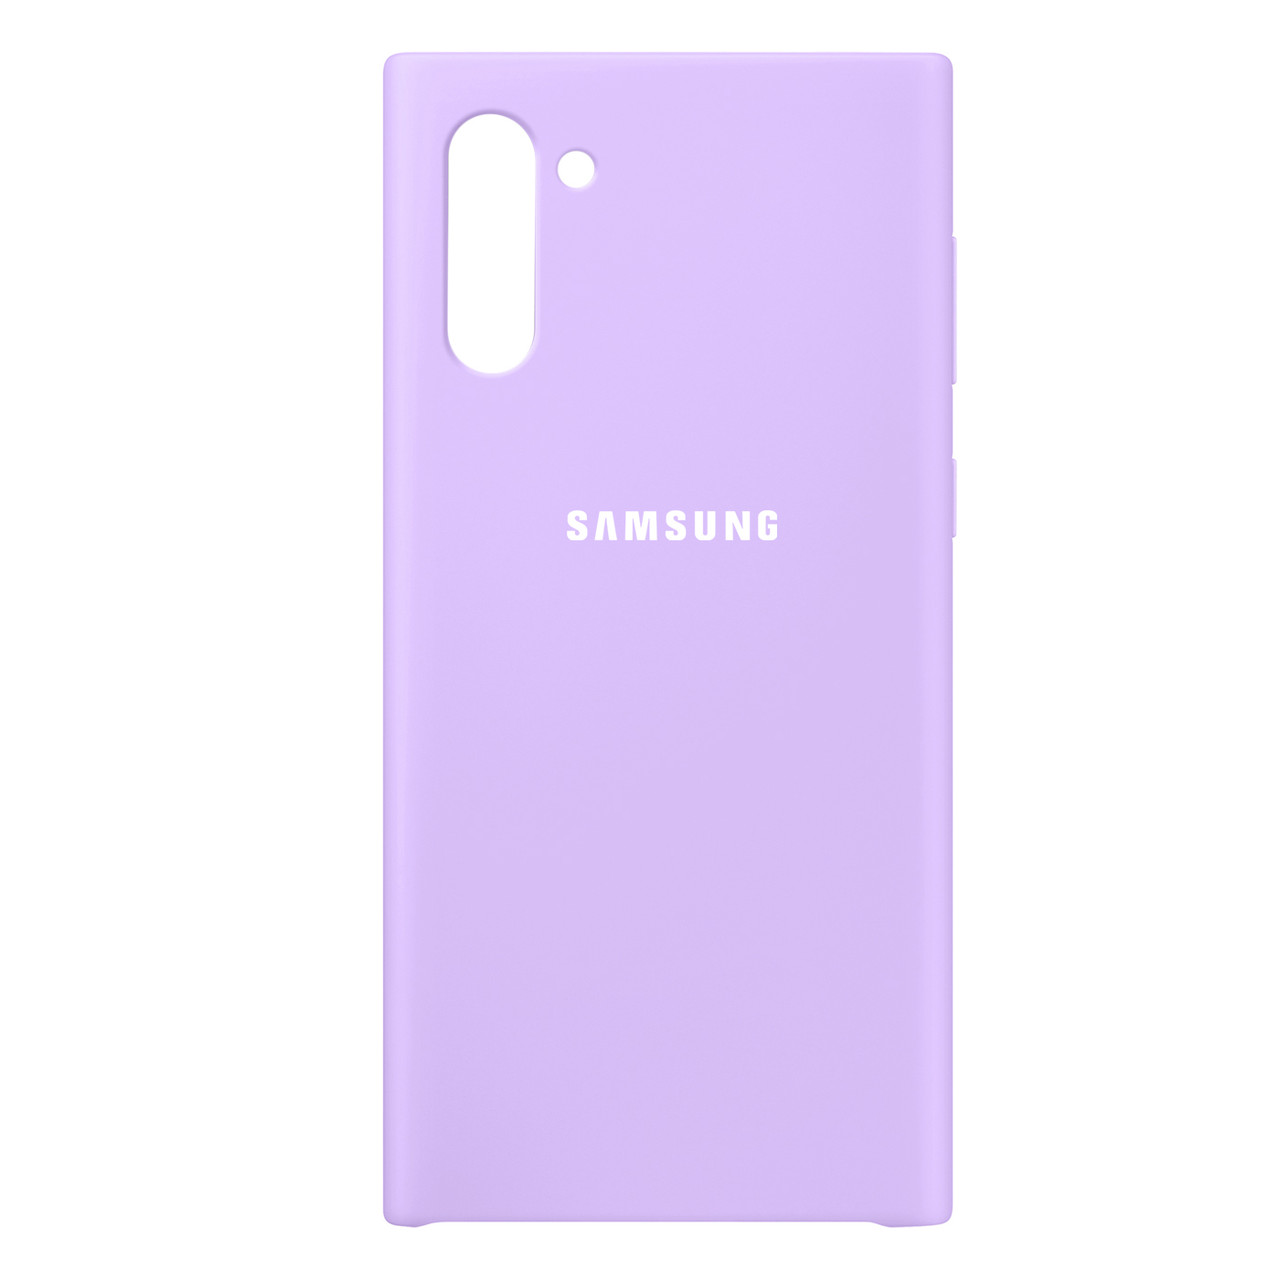 Чехол для Samsung Galaxy Note 10 back cover Silky and soft-touch Silicone Cover, Purple - фото 1 - id-p115054612